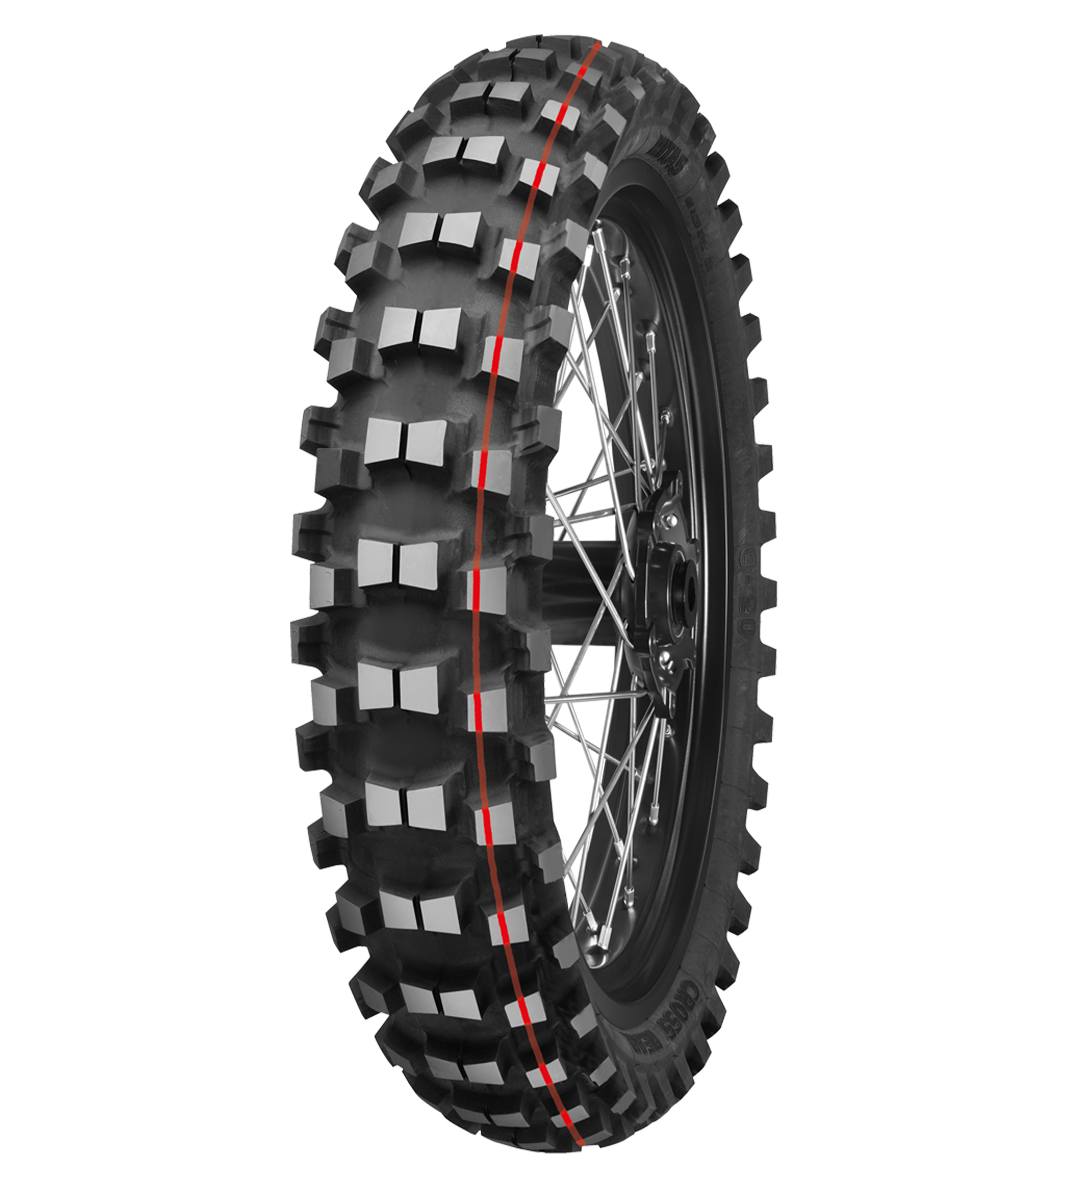 Mitas C-20 STONE KING 90/100-12 Pitcross Off-Road PIT CROSS 46M Red Tube Rear Tire, 226073, 90/100-12, C-20 Stone King, Off-Road, Pitcross, Rear, Tires - Imported and distributed in North &amp; South America by Lindeco Genuine Powersports - Premier Powersports Equipment and Accessories for Motorcycle Enthusiasts, Professional Riders and Dealers.